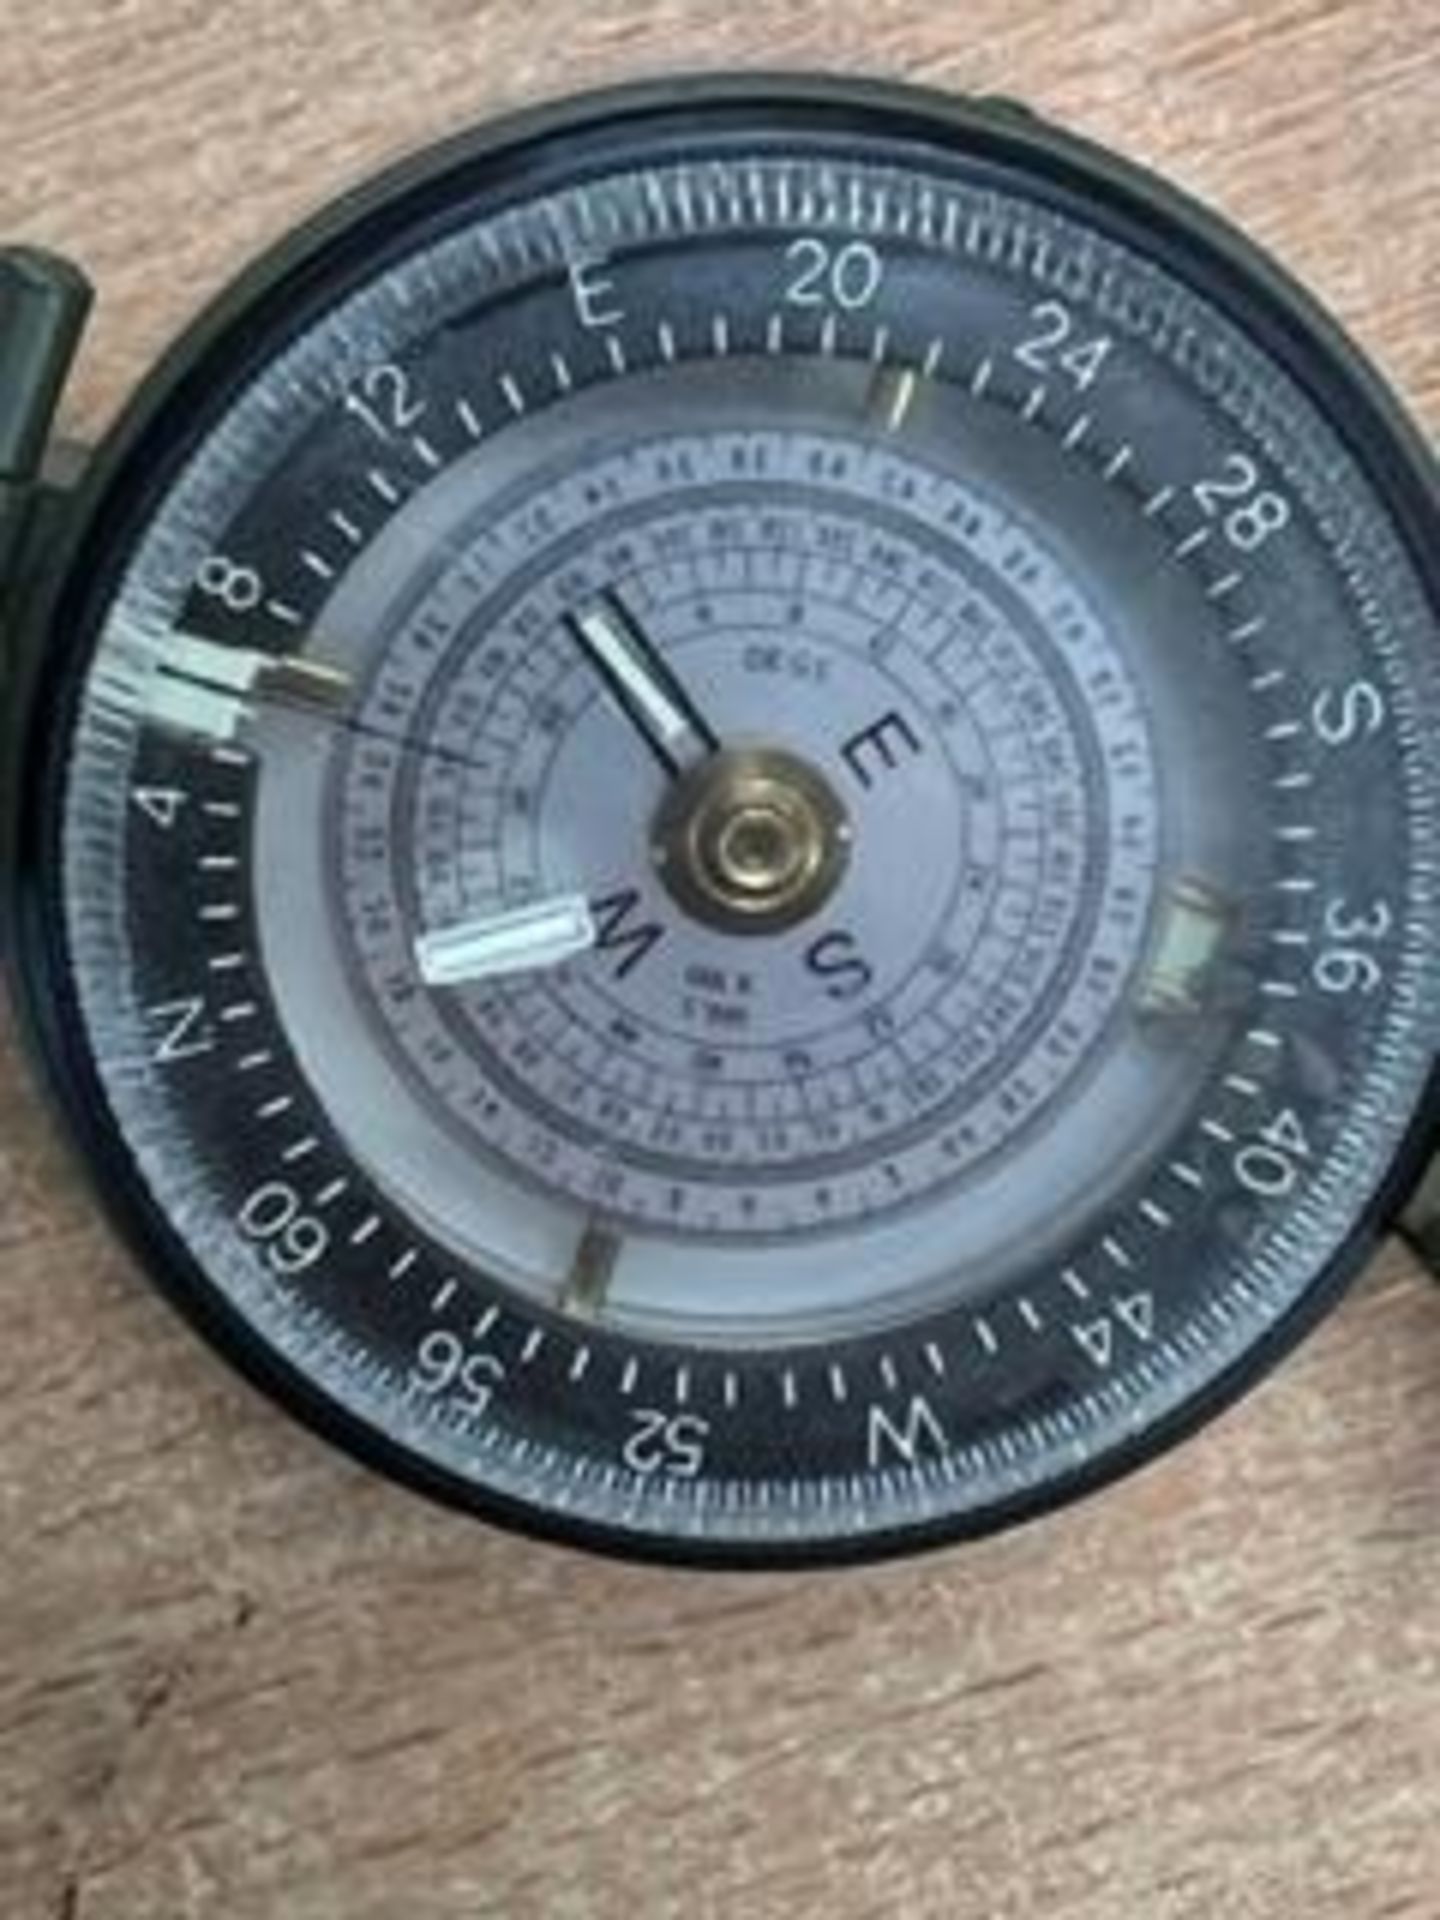 FRANCIS BAKER M88 BRITISH ARMY PRISMATIC COMPASS IN MILS NATO MARKS - Image 4 of 7